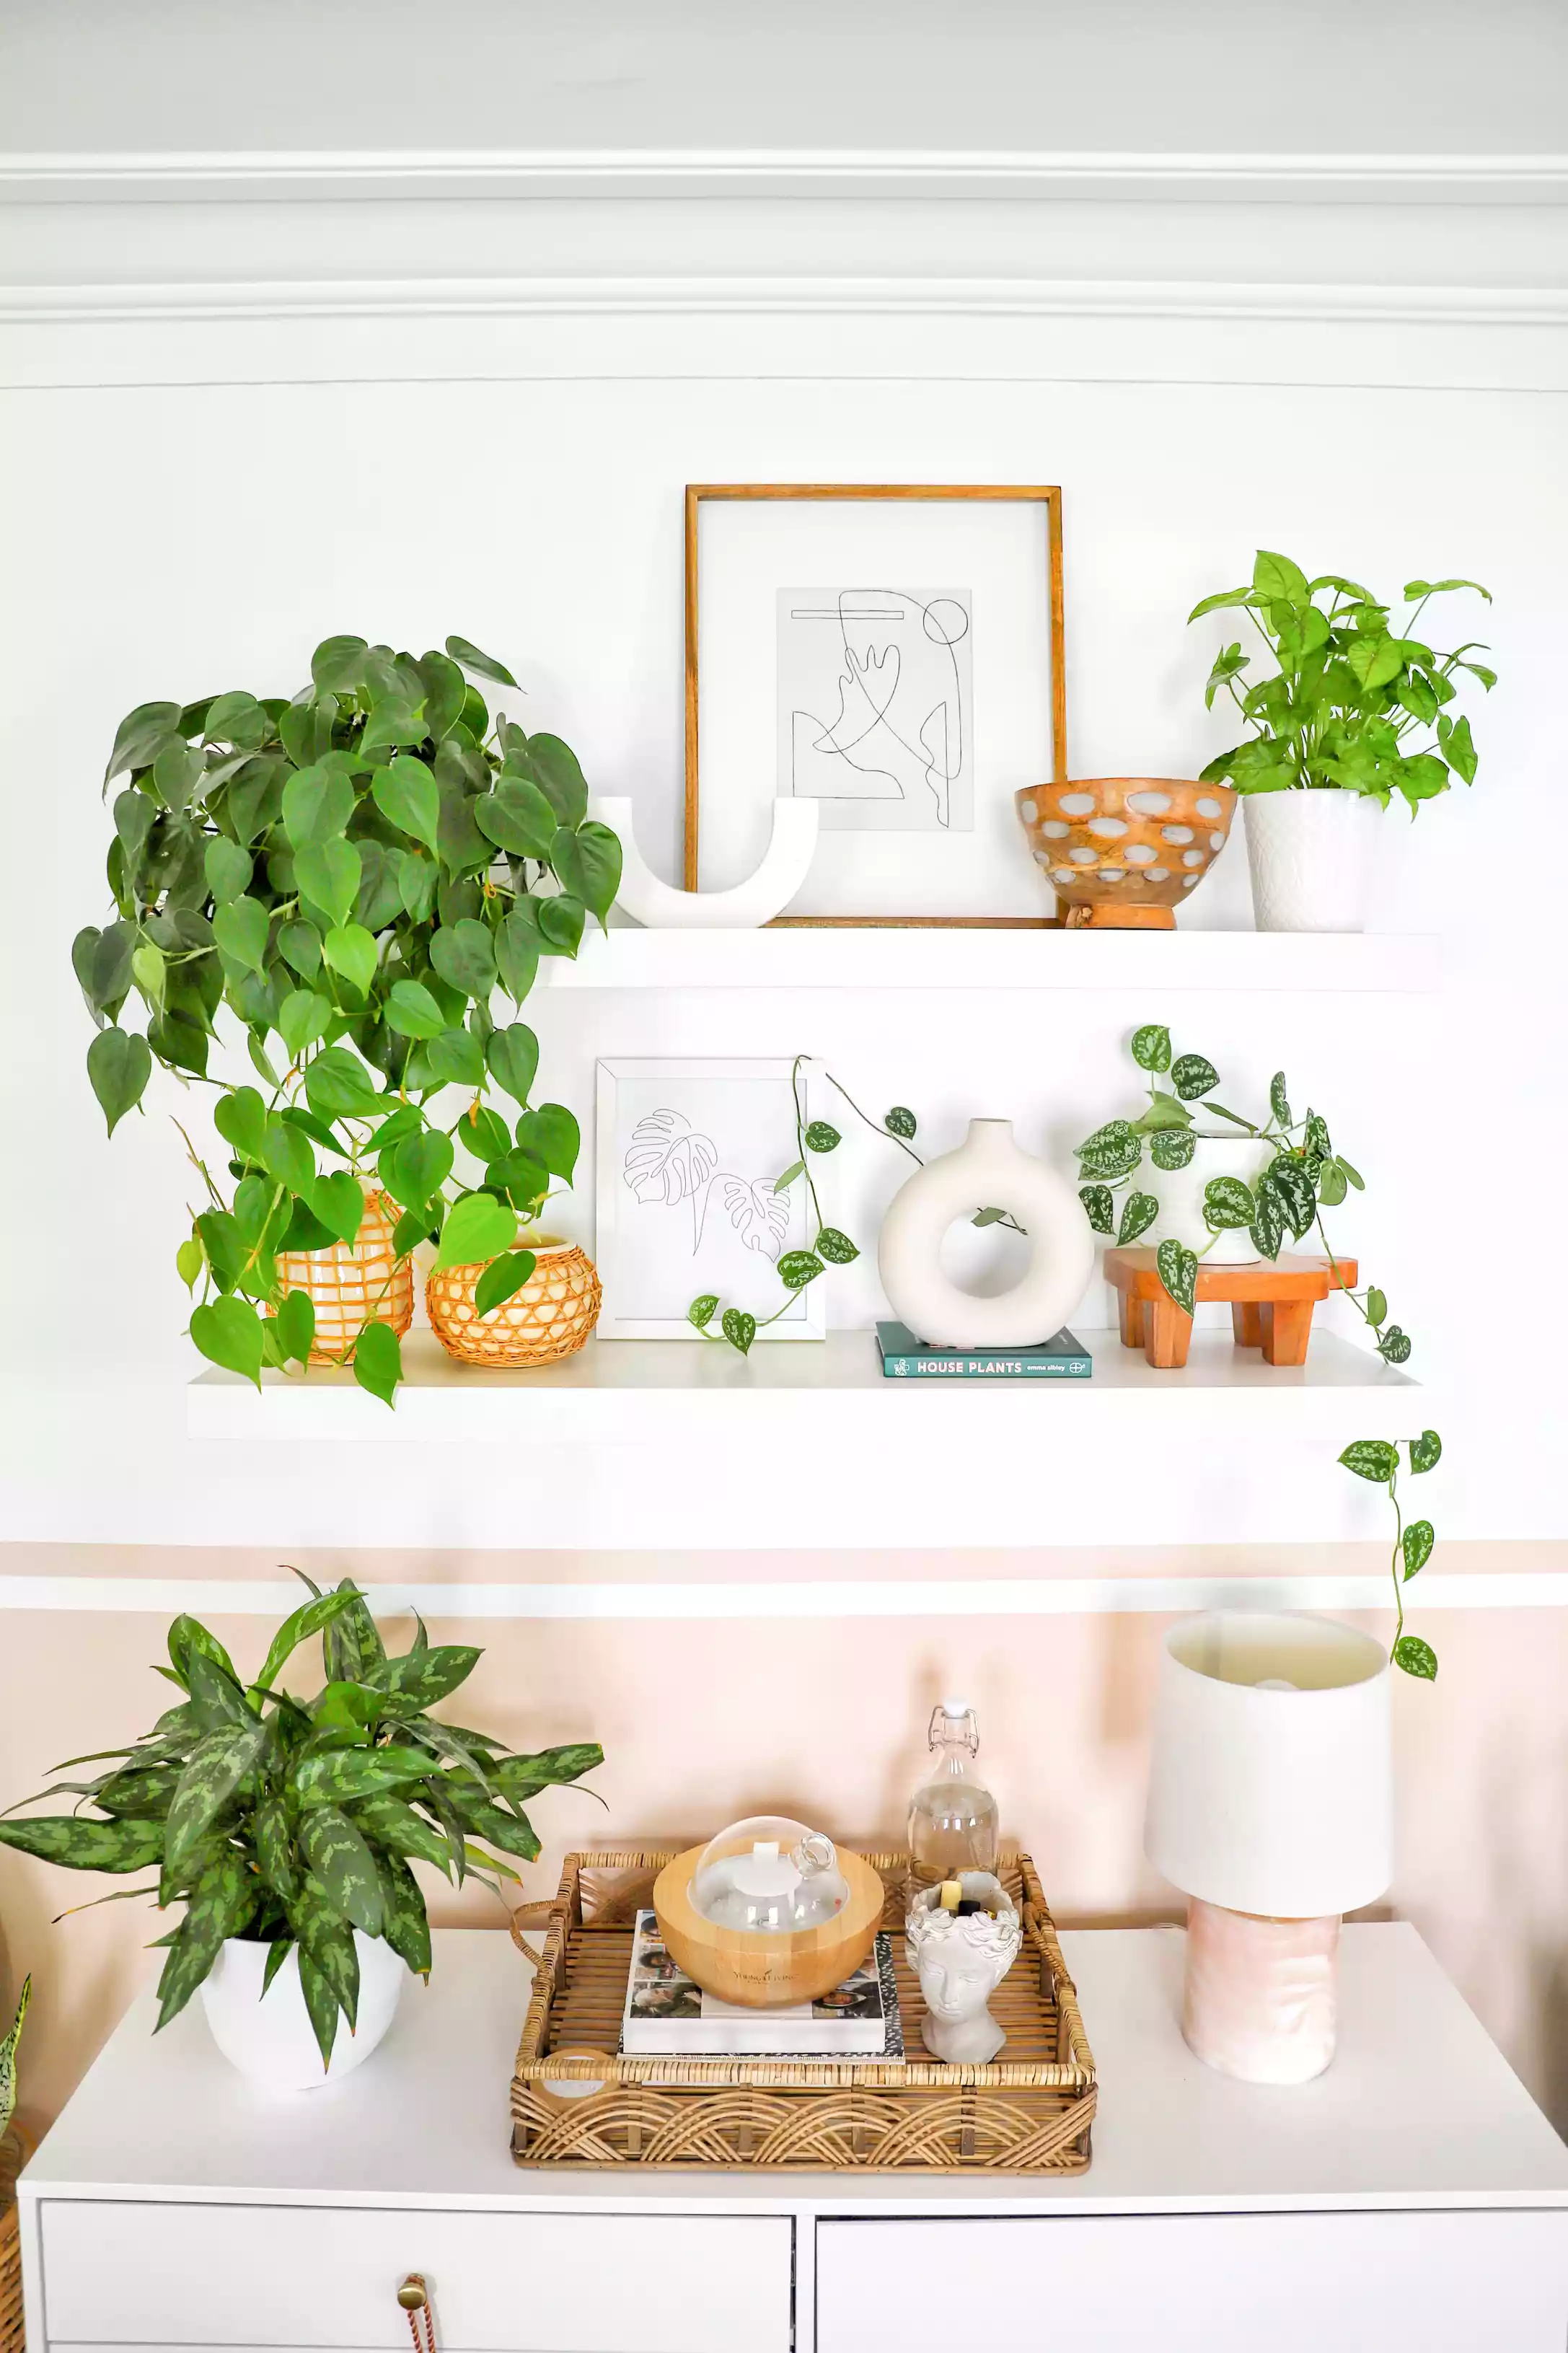 22 perfectly styled plant shelf ideas to decorate your home - 75